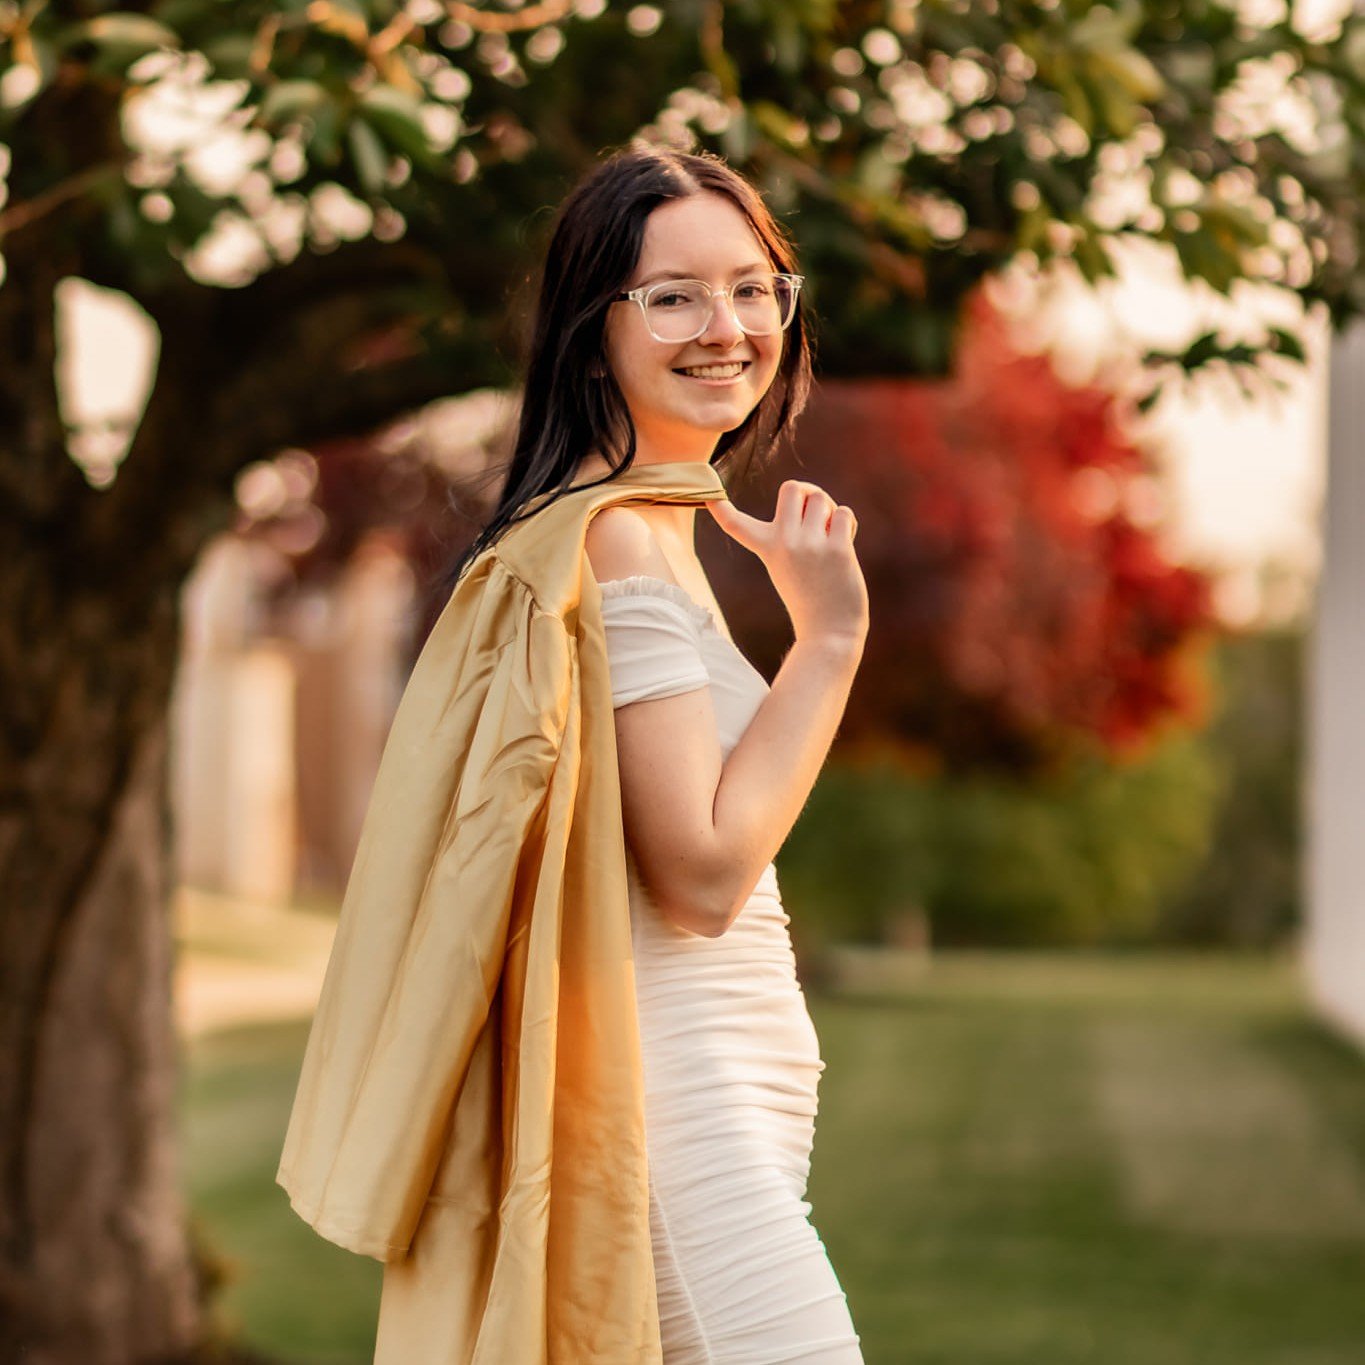 ✨️Graduation is right around the corner for highschool &amp; college!🎊
📸Book a cap &amp; gown mini! 📸
Still haven't gotten your senior pictures? 
No worries, we can do your cap &amp; gown and throw in some senior portraits as well!

Www.michalareb